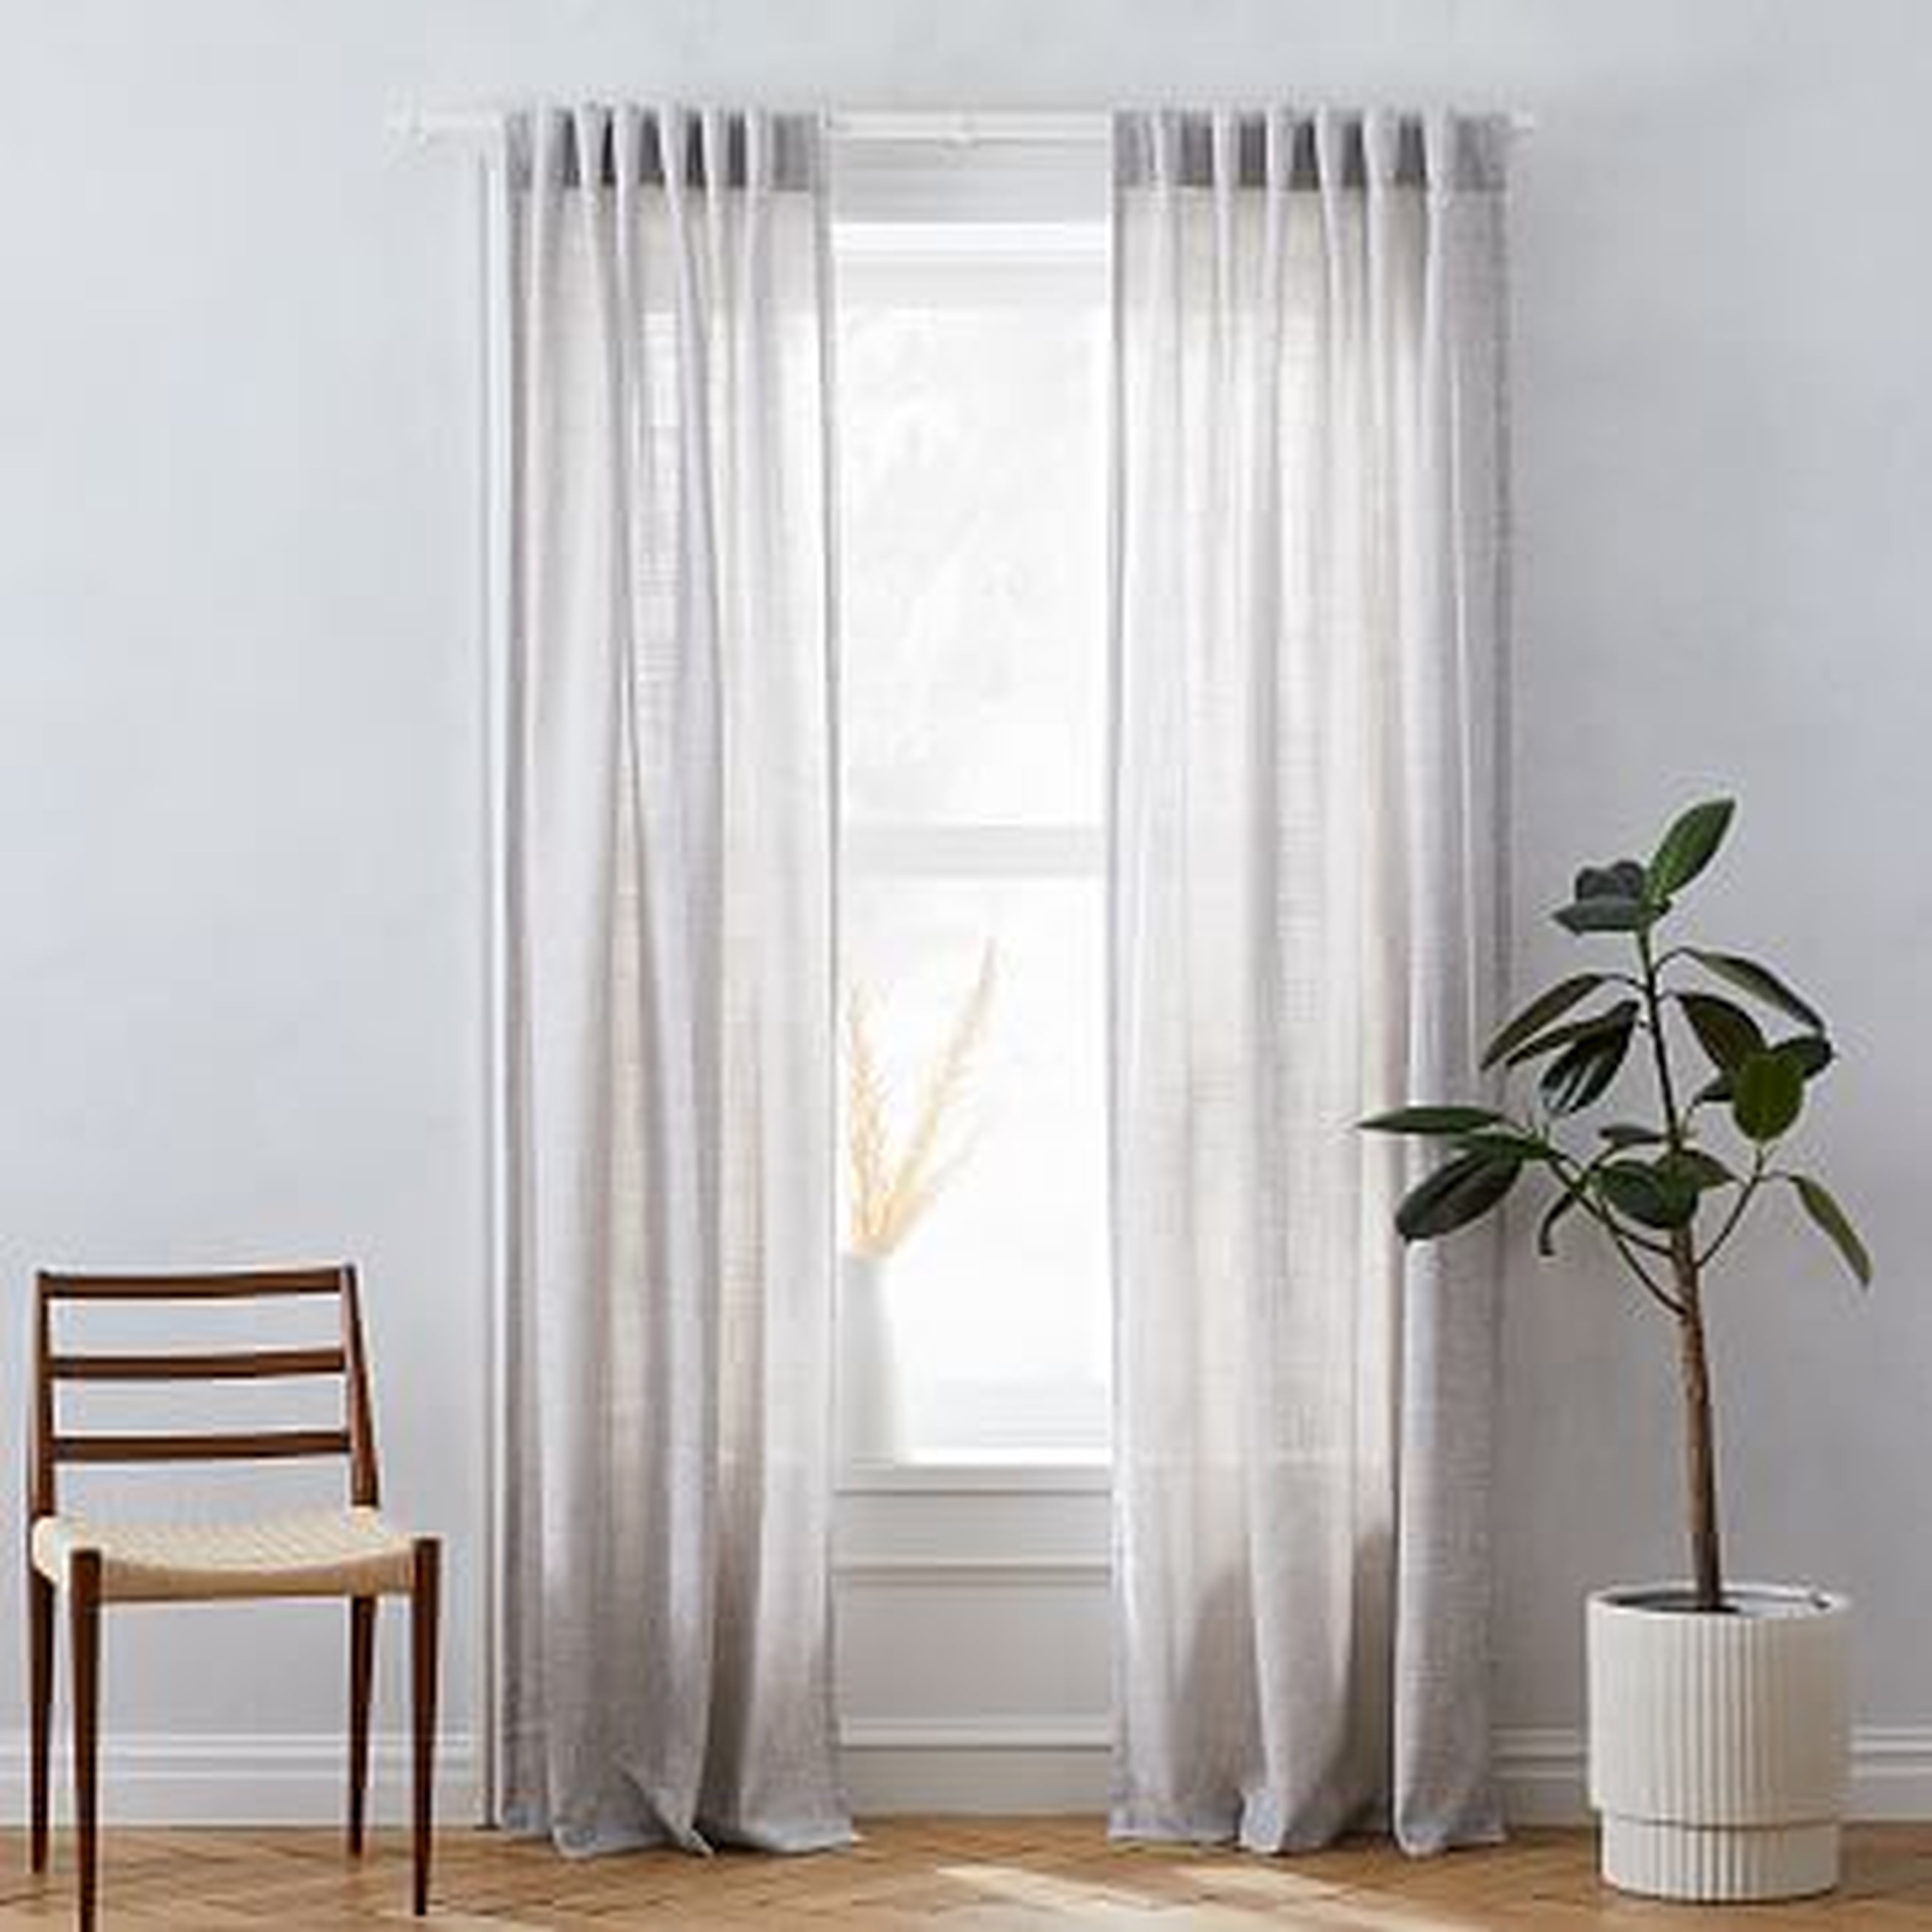 Crossweave Curtain with Blackout Lining, Stone White, 48"X96" - West Elm